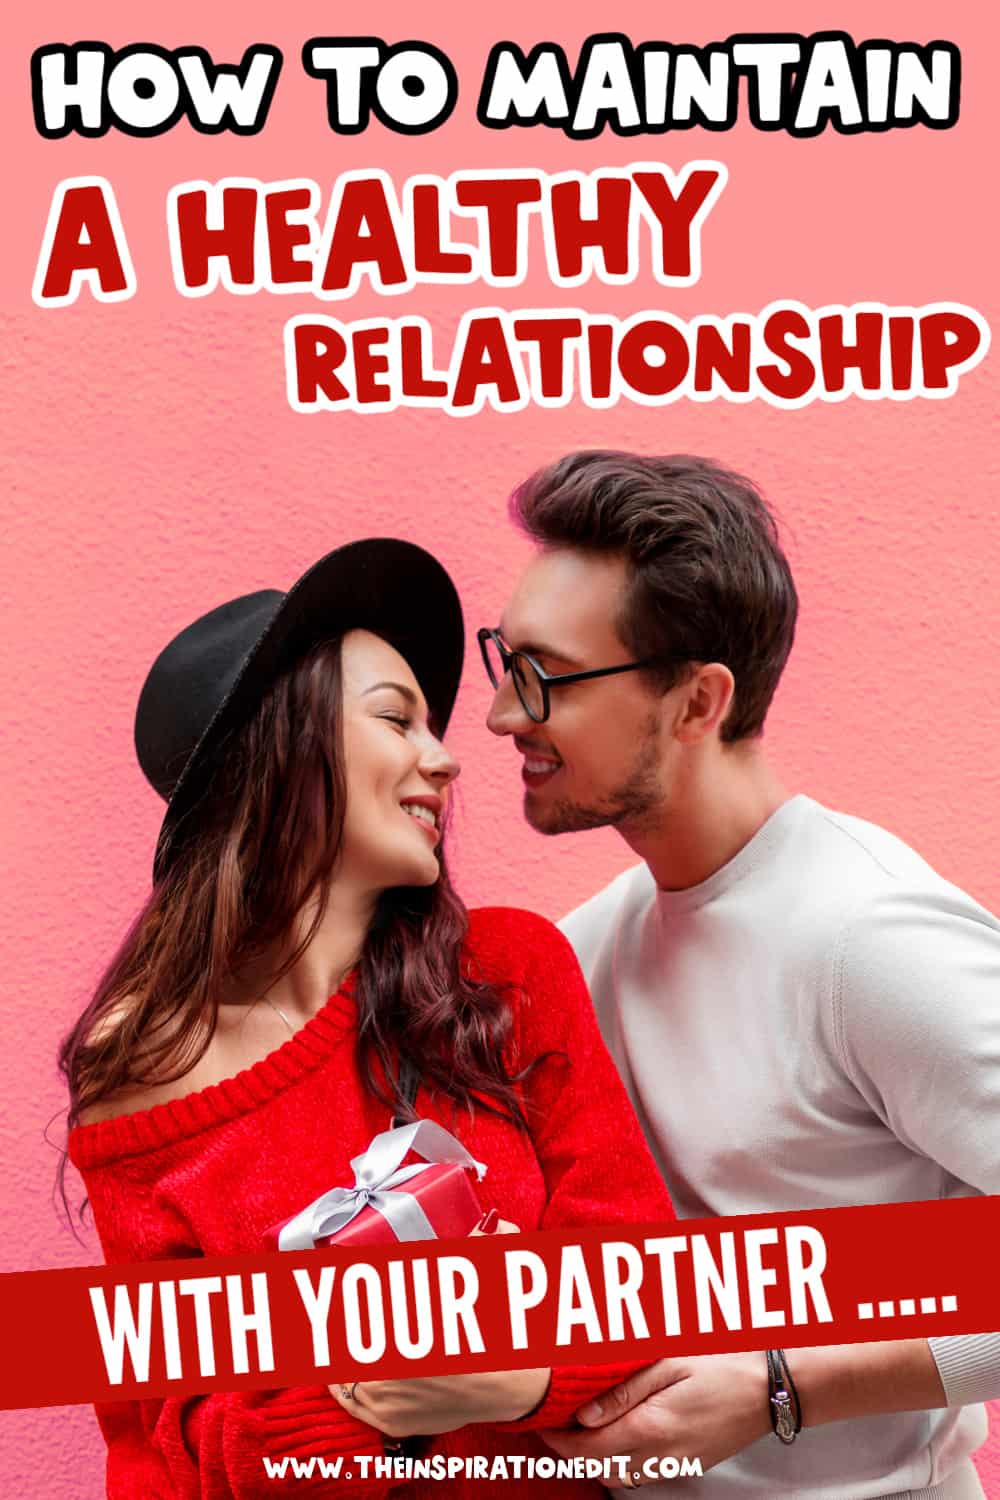 How To Maintain A Healthy Relationship With Your Partner · The Inspiration Edit 8523